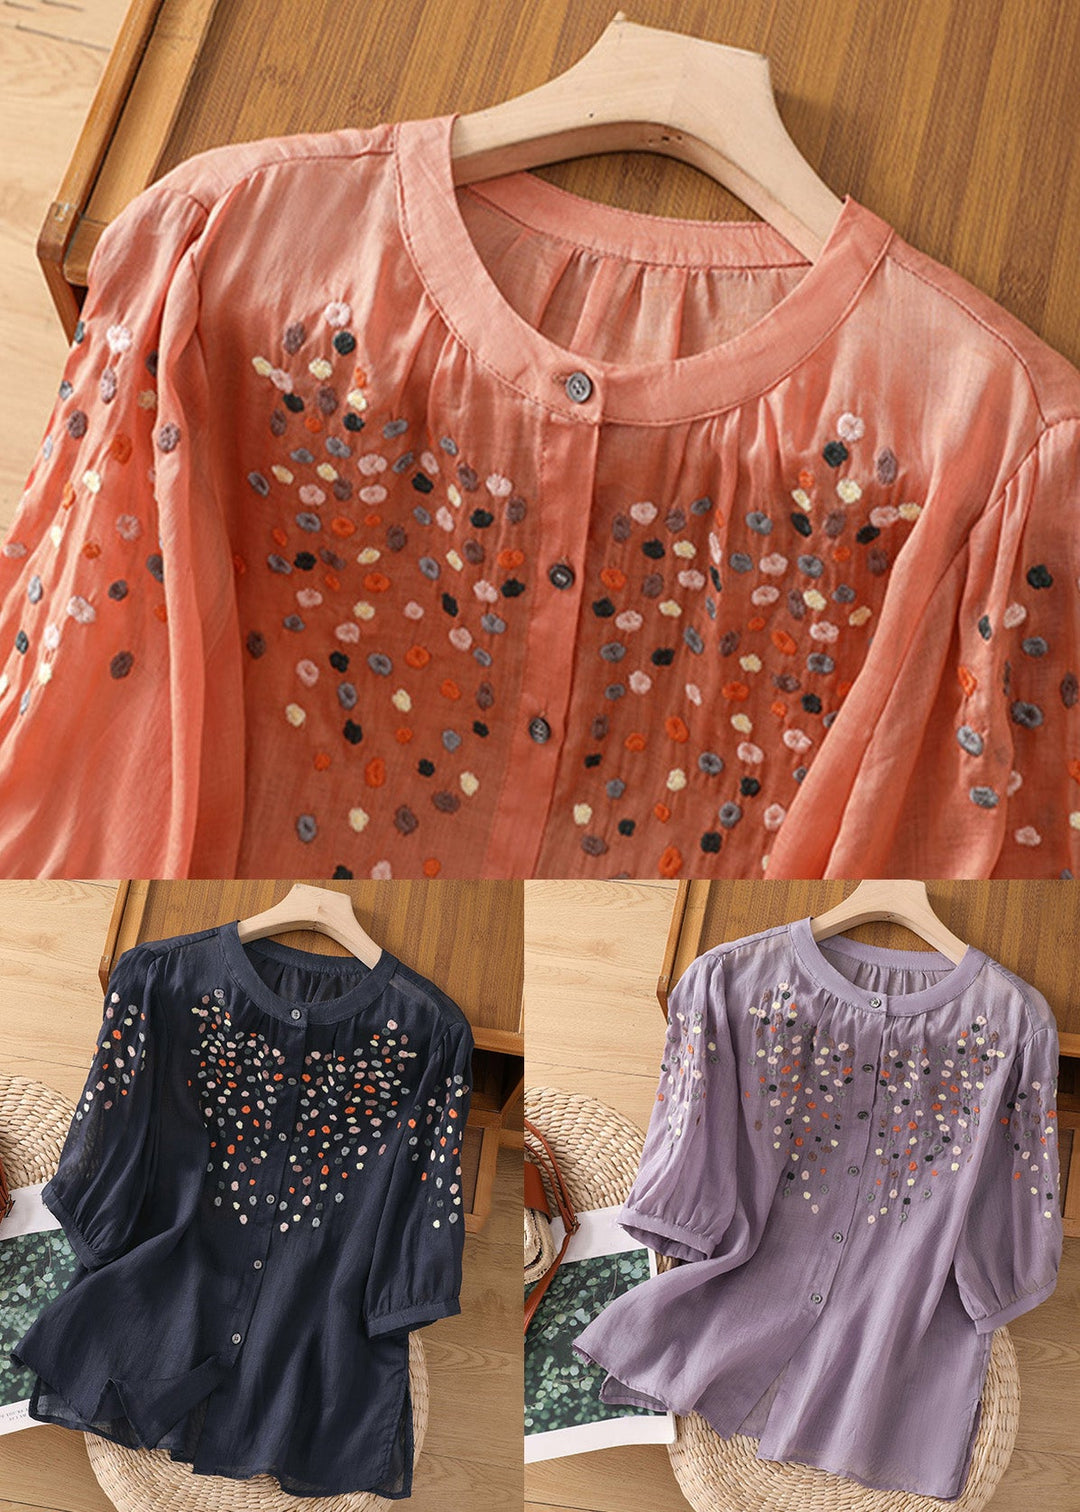 New Purple O Neck Embroideried Side Open Linen Blouse Spring